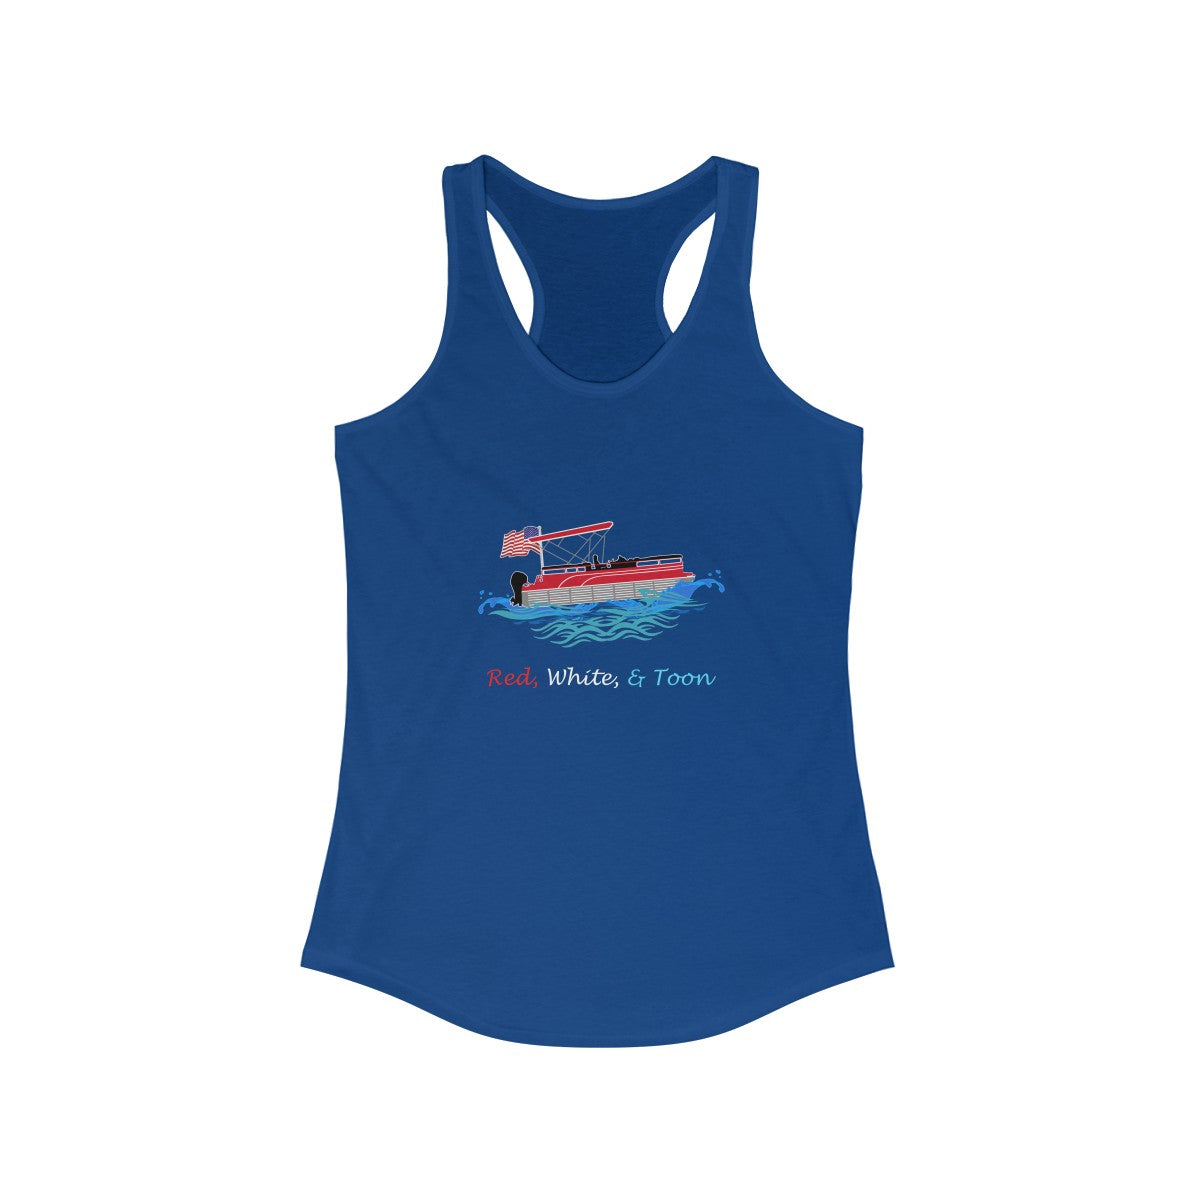 Red White and Toon - Pontoon Girl 4th of July Tank Top!